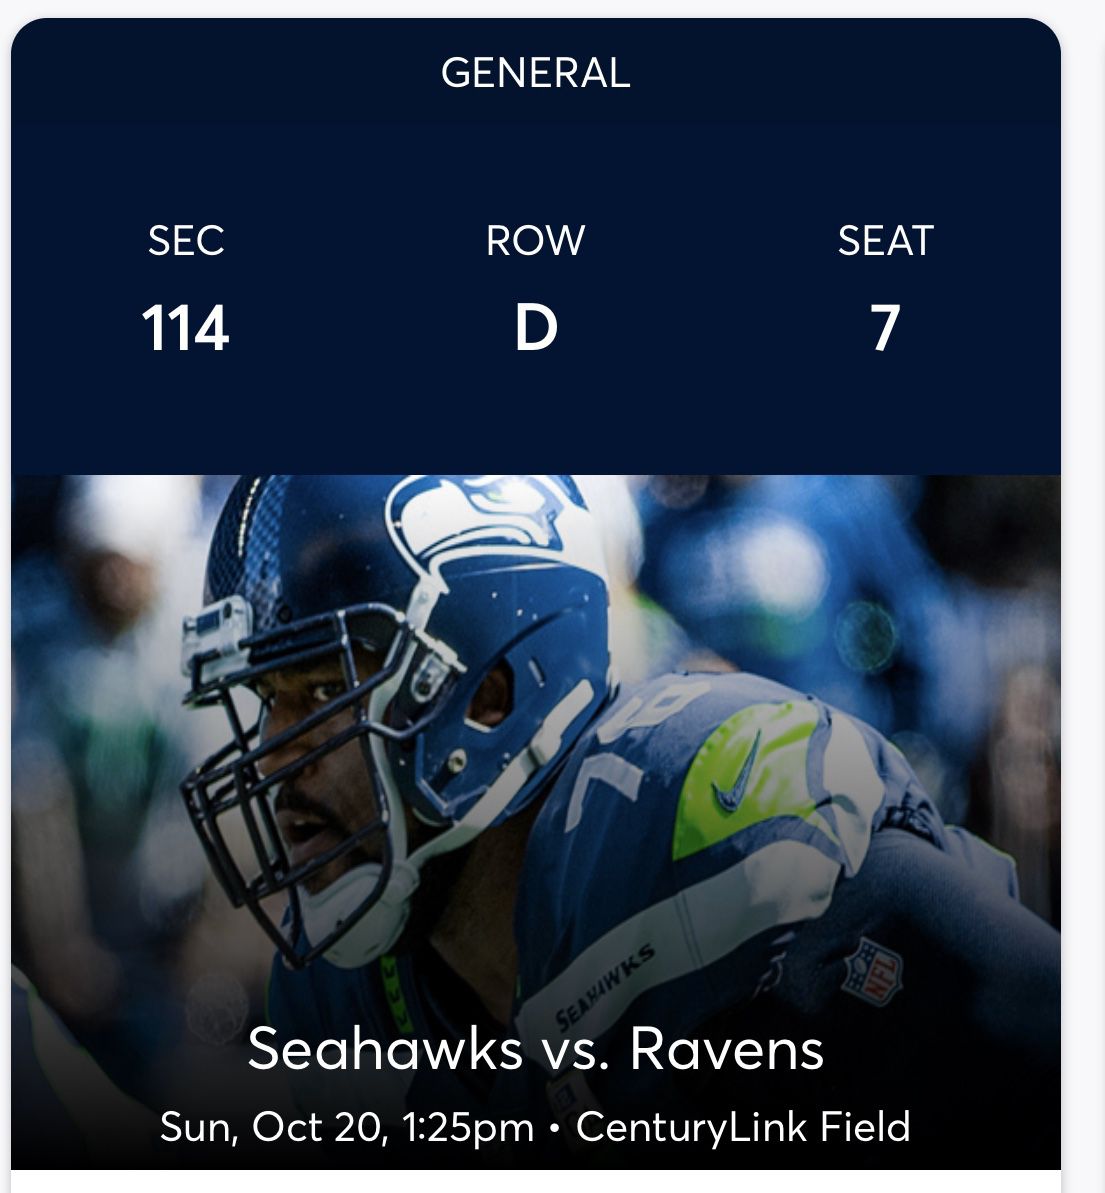 Seahawks vs Baltimore Ravens - only 4 rows from the Field!